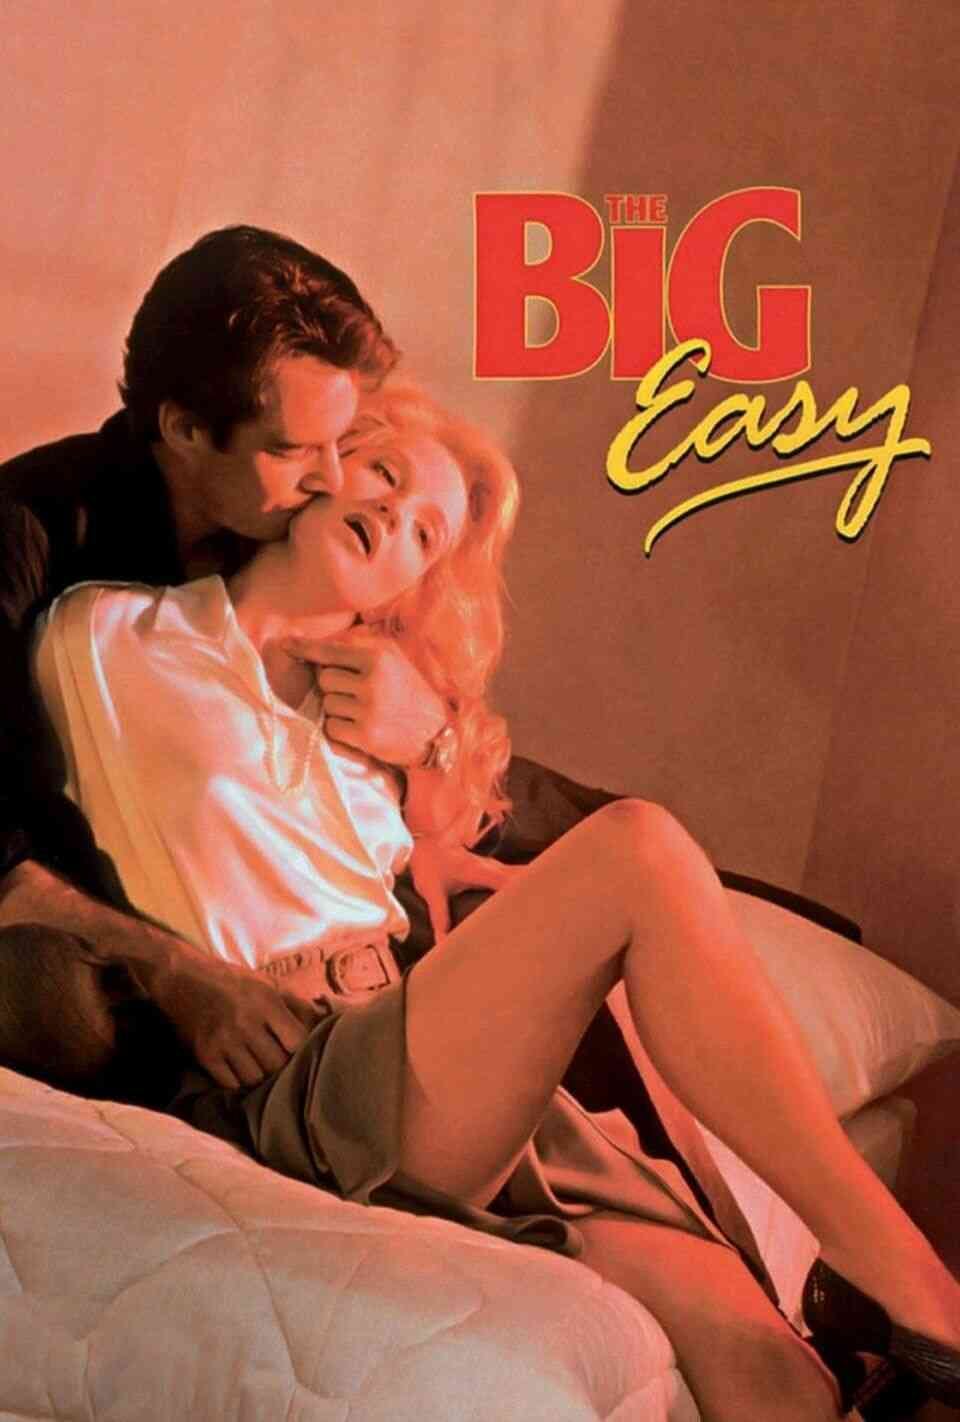 Read The Big Easy screenplay (poster)